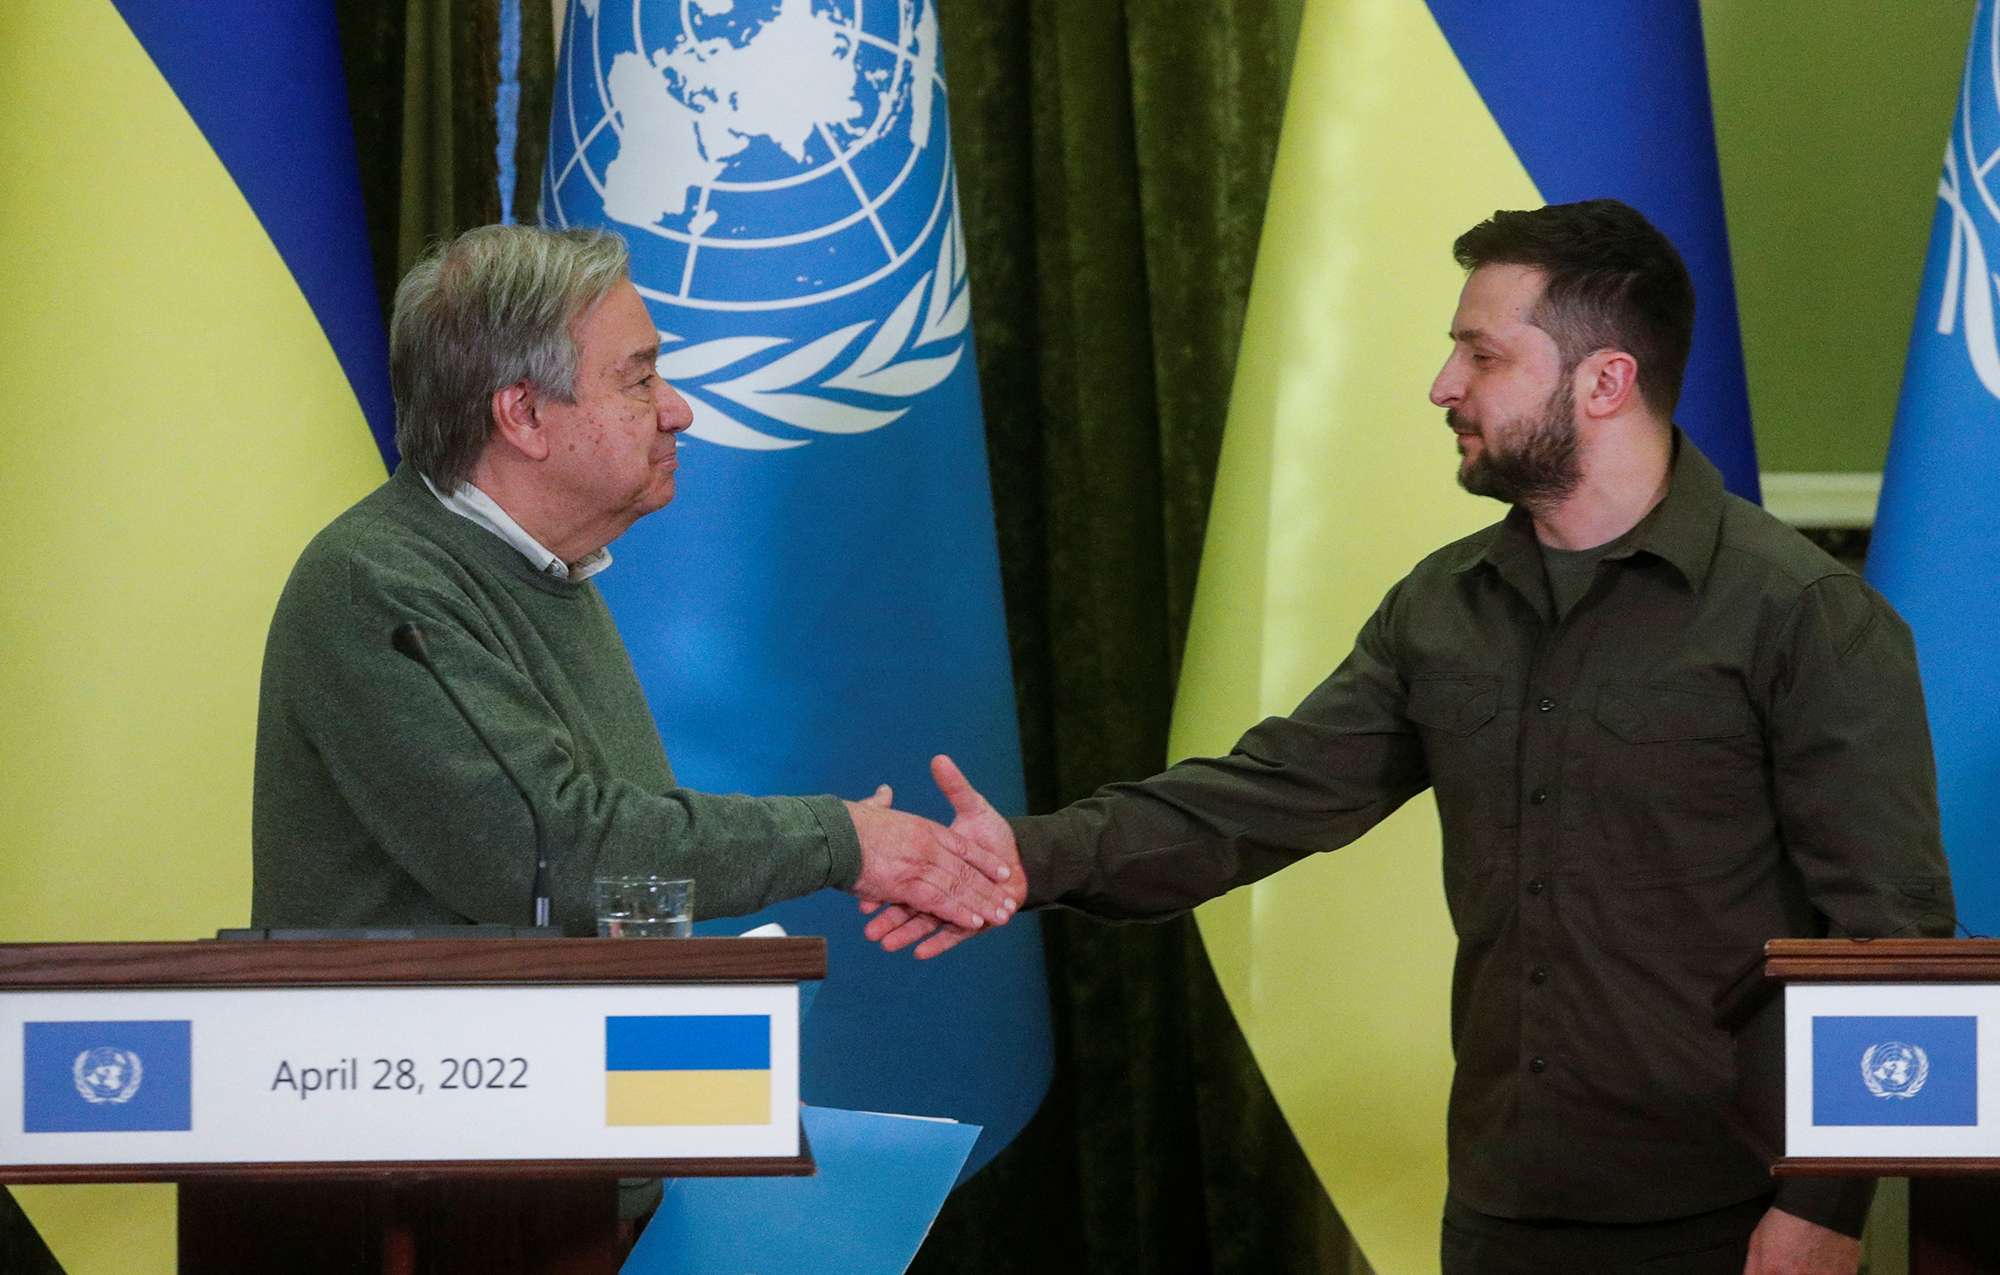 United Nations Secretary-General António Guterres is greeted by Ukrainian President Volodymyr Zelensky prior to a joint news conference in Kyiv, Ukraine Thursday April 28.